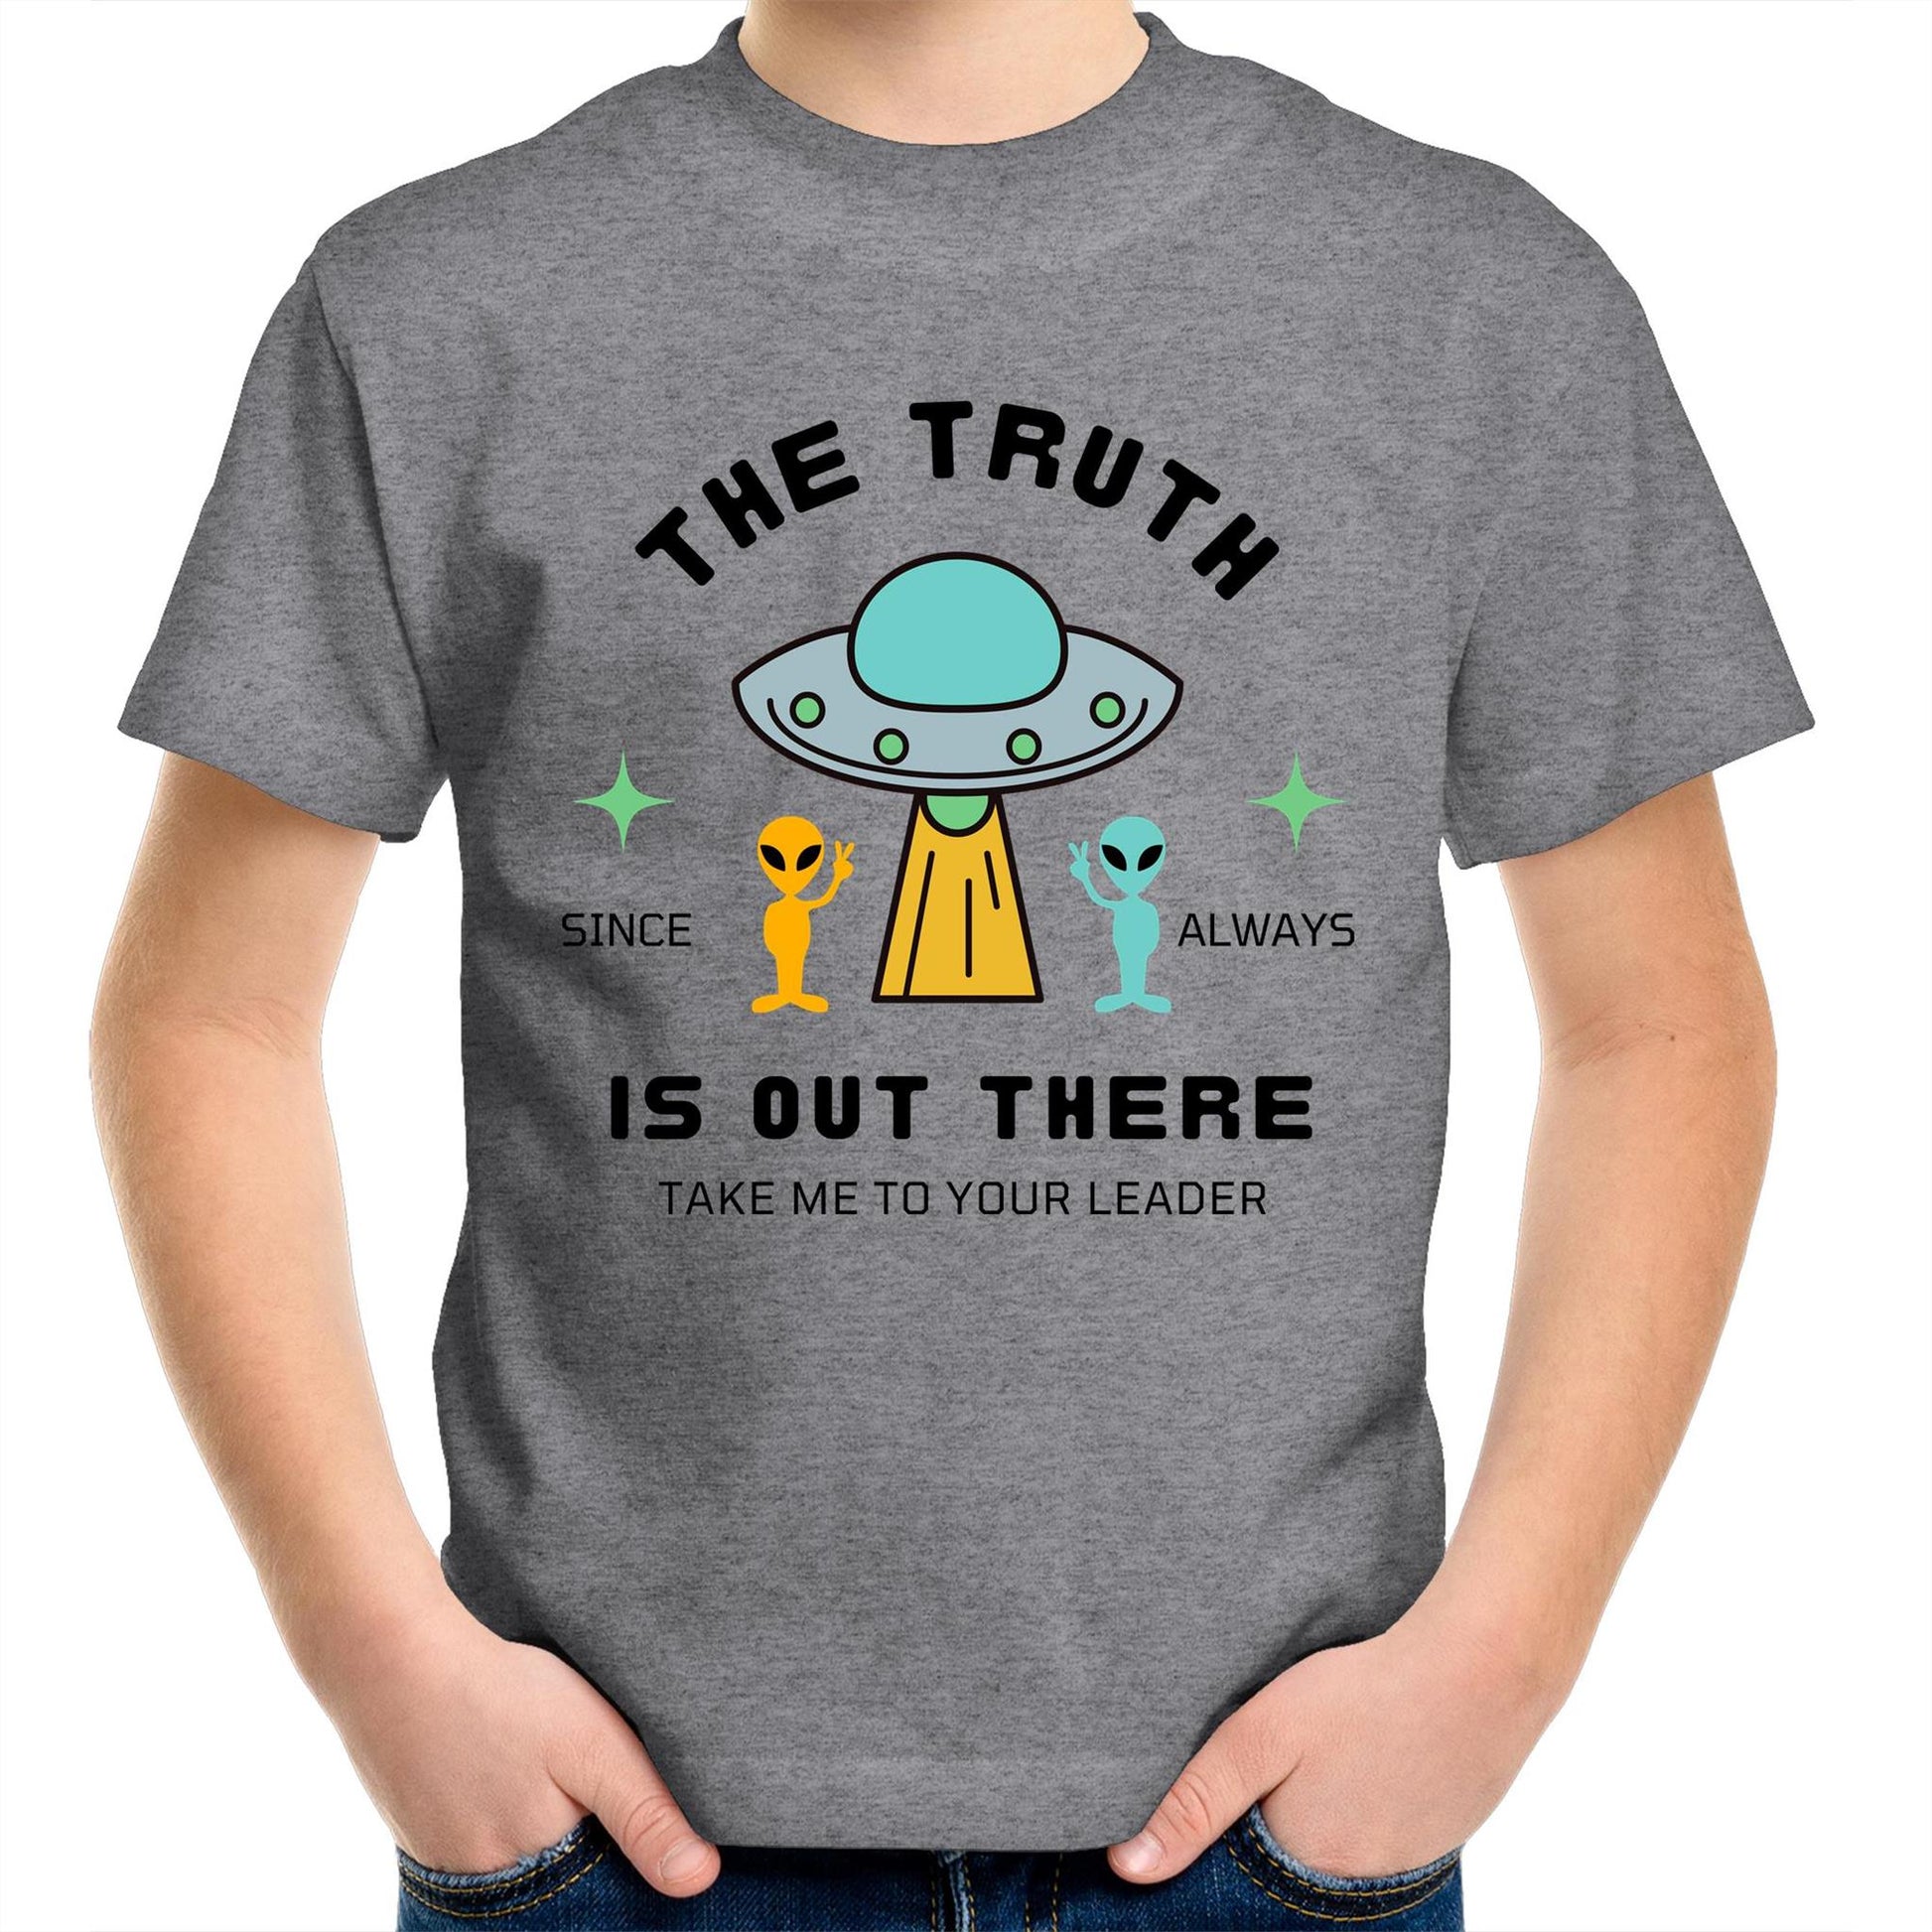 The Truth Is Out There - Kids Youth Crew T-Shirt Grey Marle Kids Youth T-shirt Sci Fi